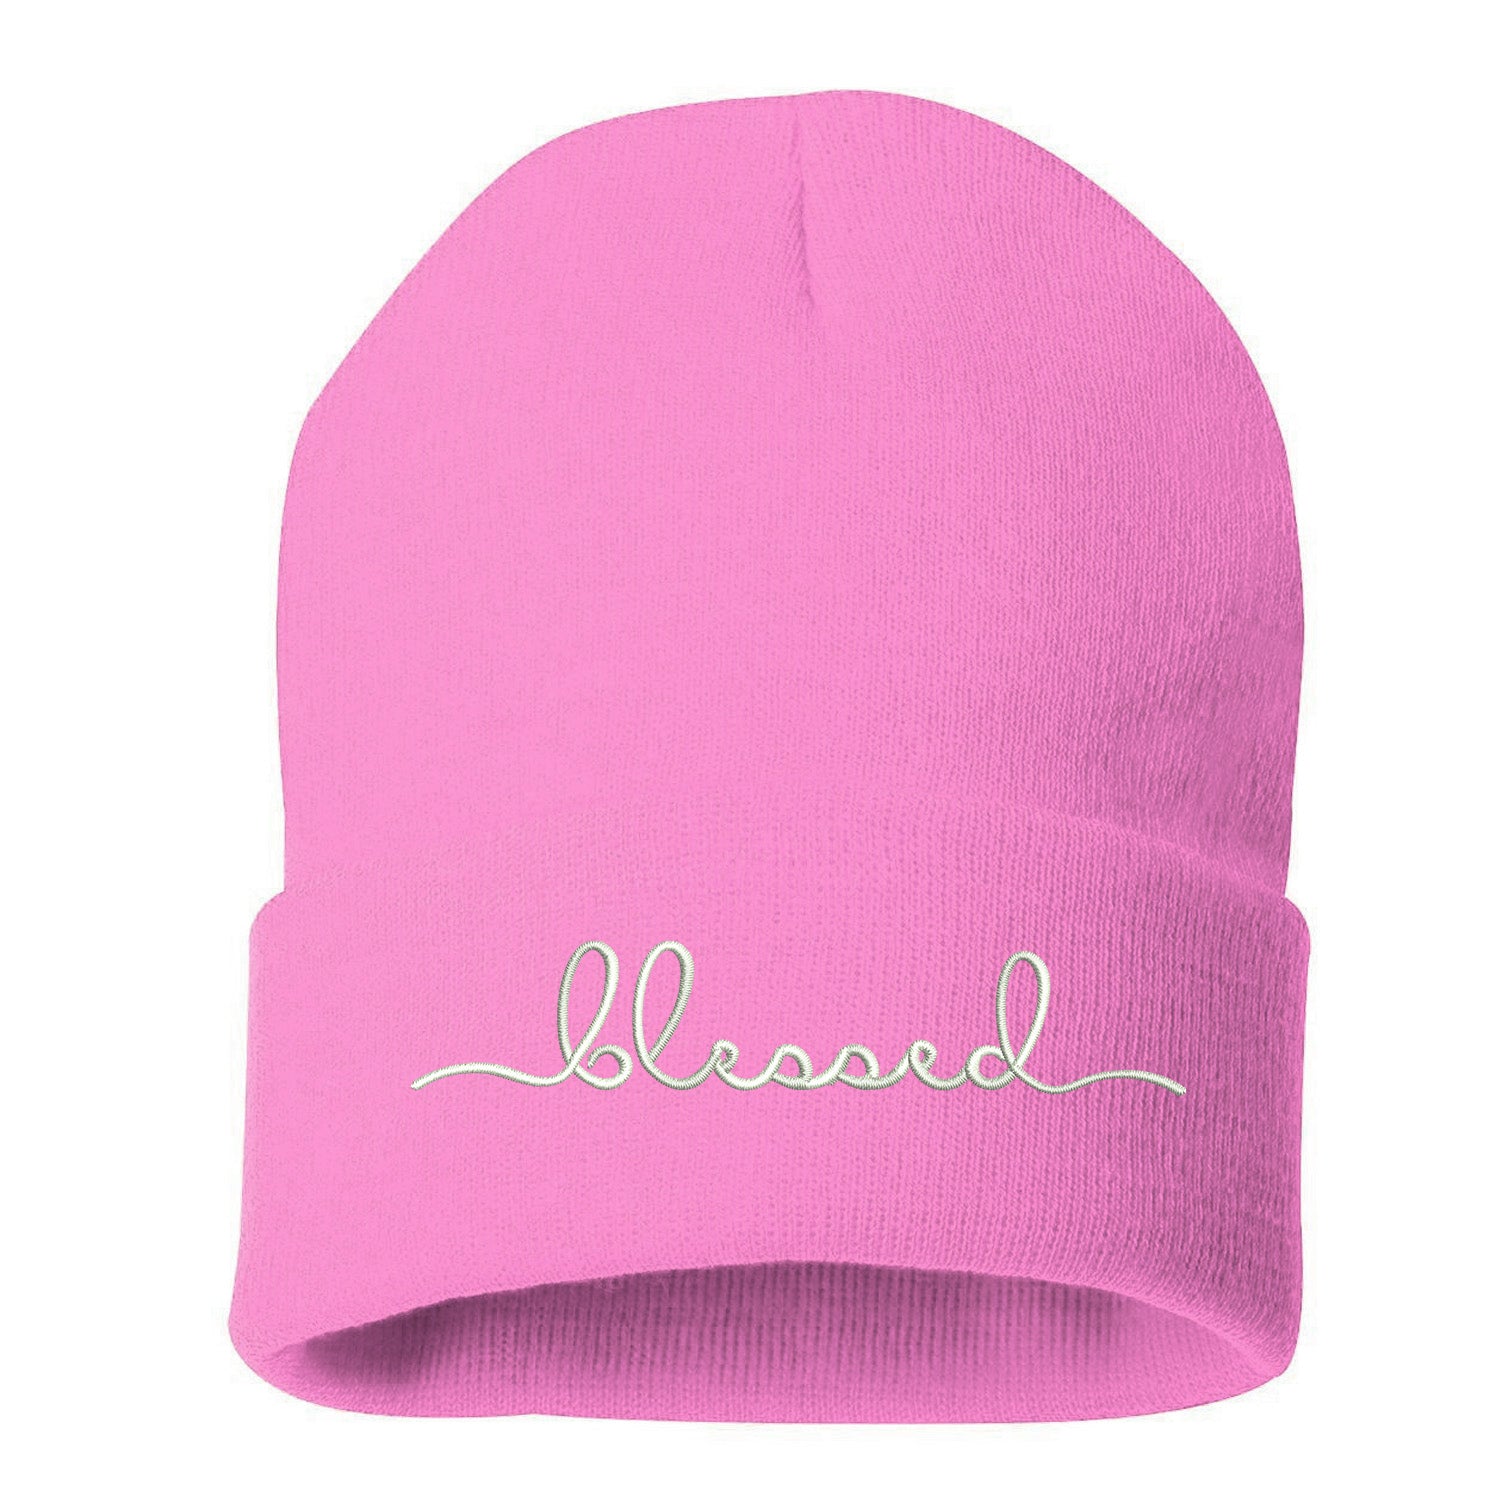 Unisex Blessed Cuffed Beanie Hat, Embroidered Beanie Cap, Cuffed Beanie, Blessed Beanie Hat, Custom Embroidery, Blessed, Thanksgiving Hat, Cursive Text, Embroidered Text, Pink Cap Hat, DSY Lifestyle Beanie, Made in LA